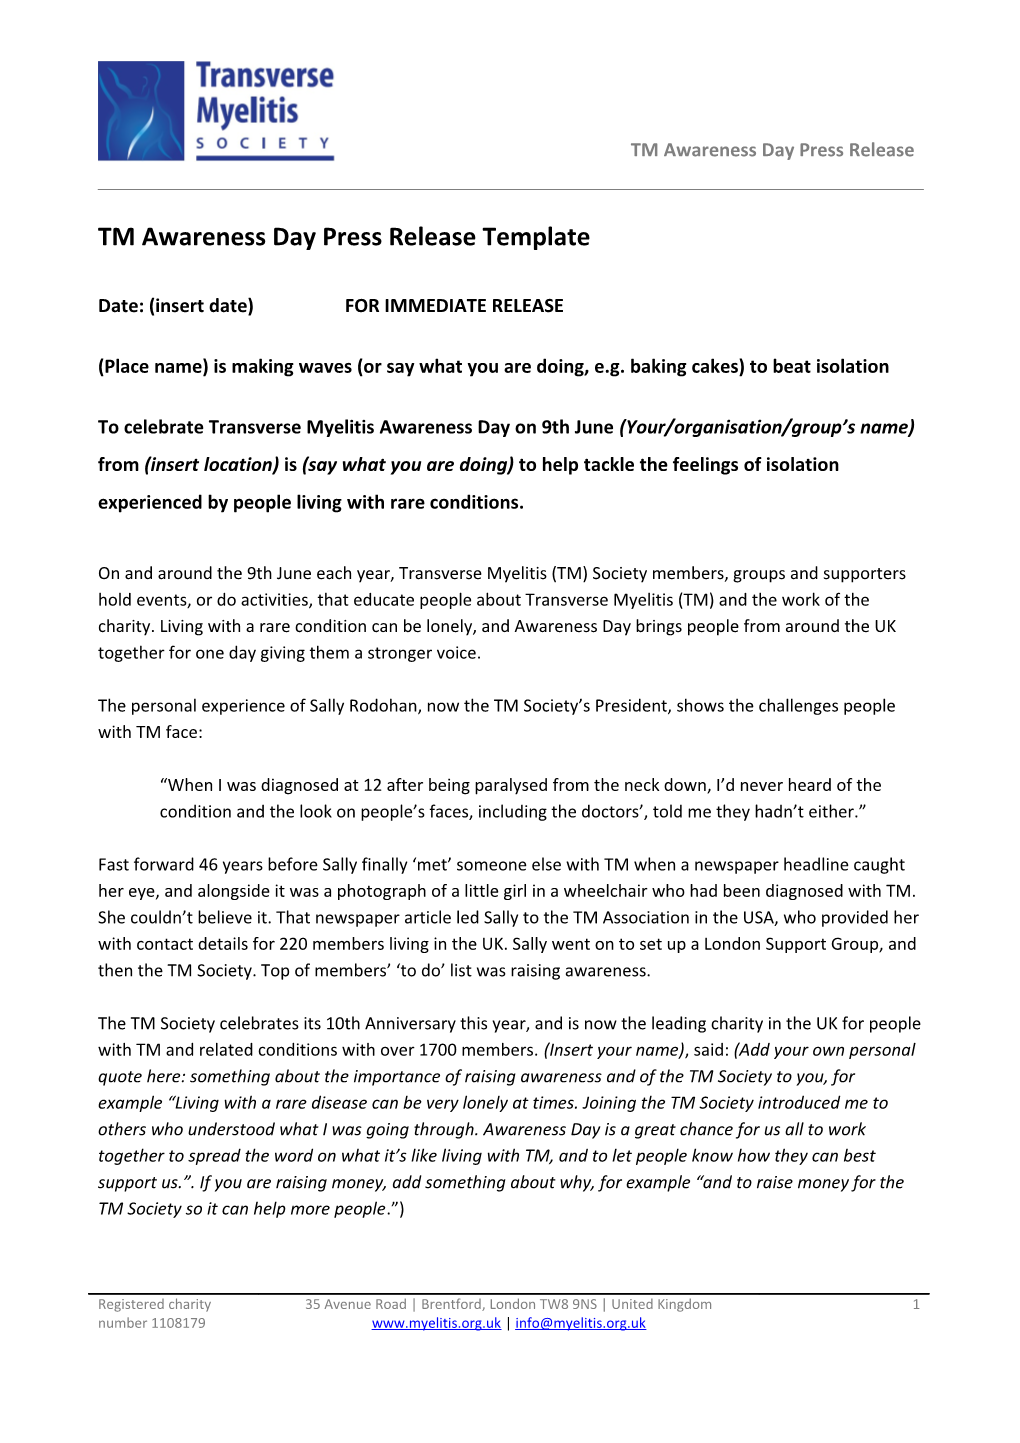 TM Awareness Day Press Release Template